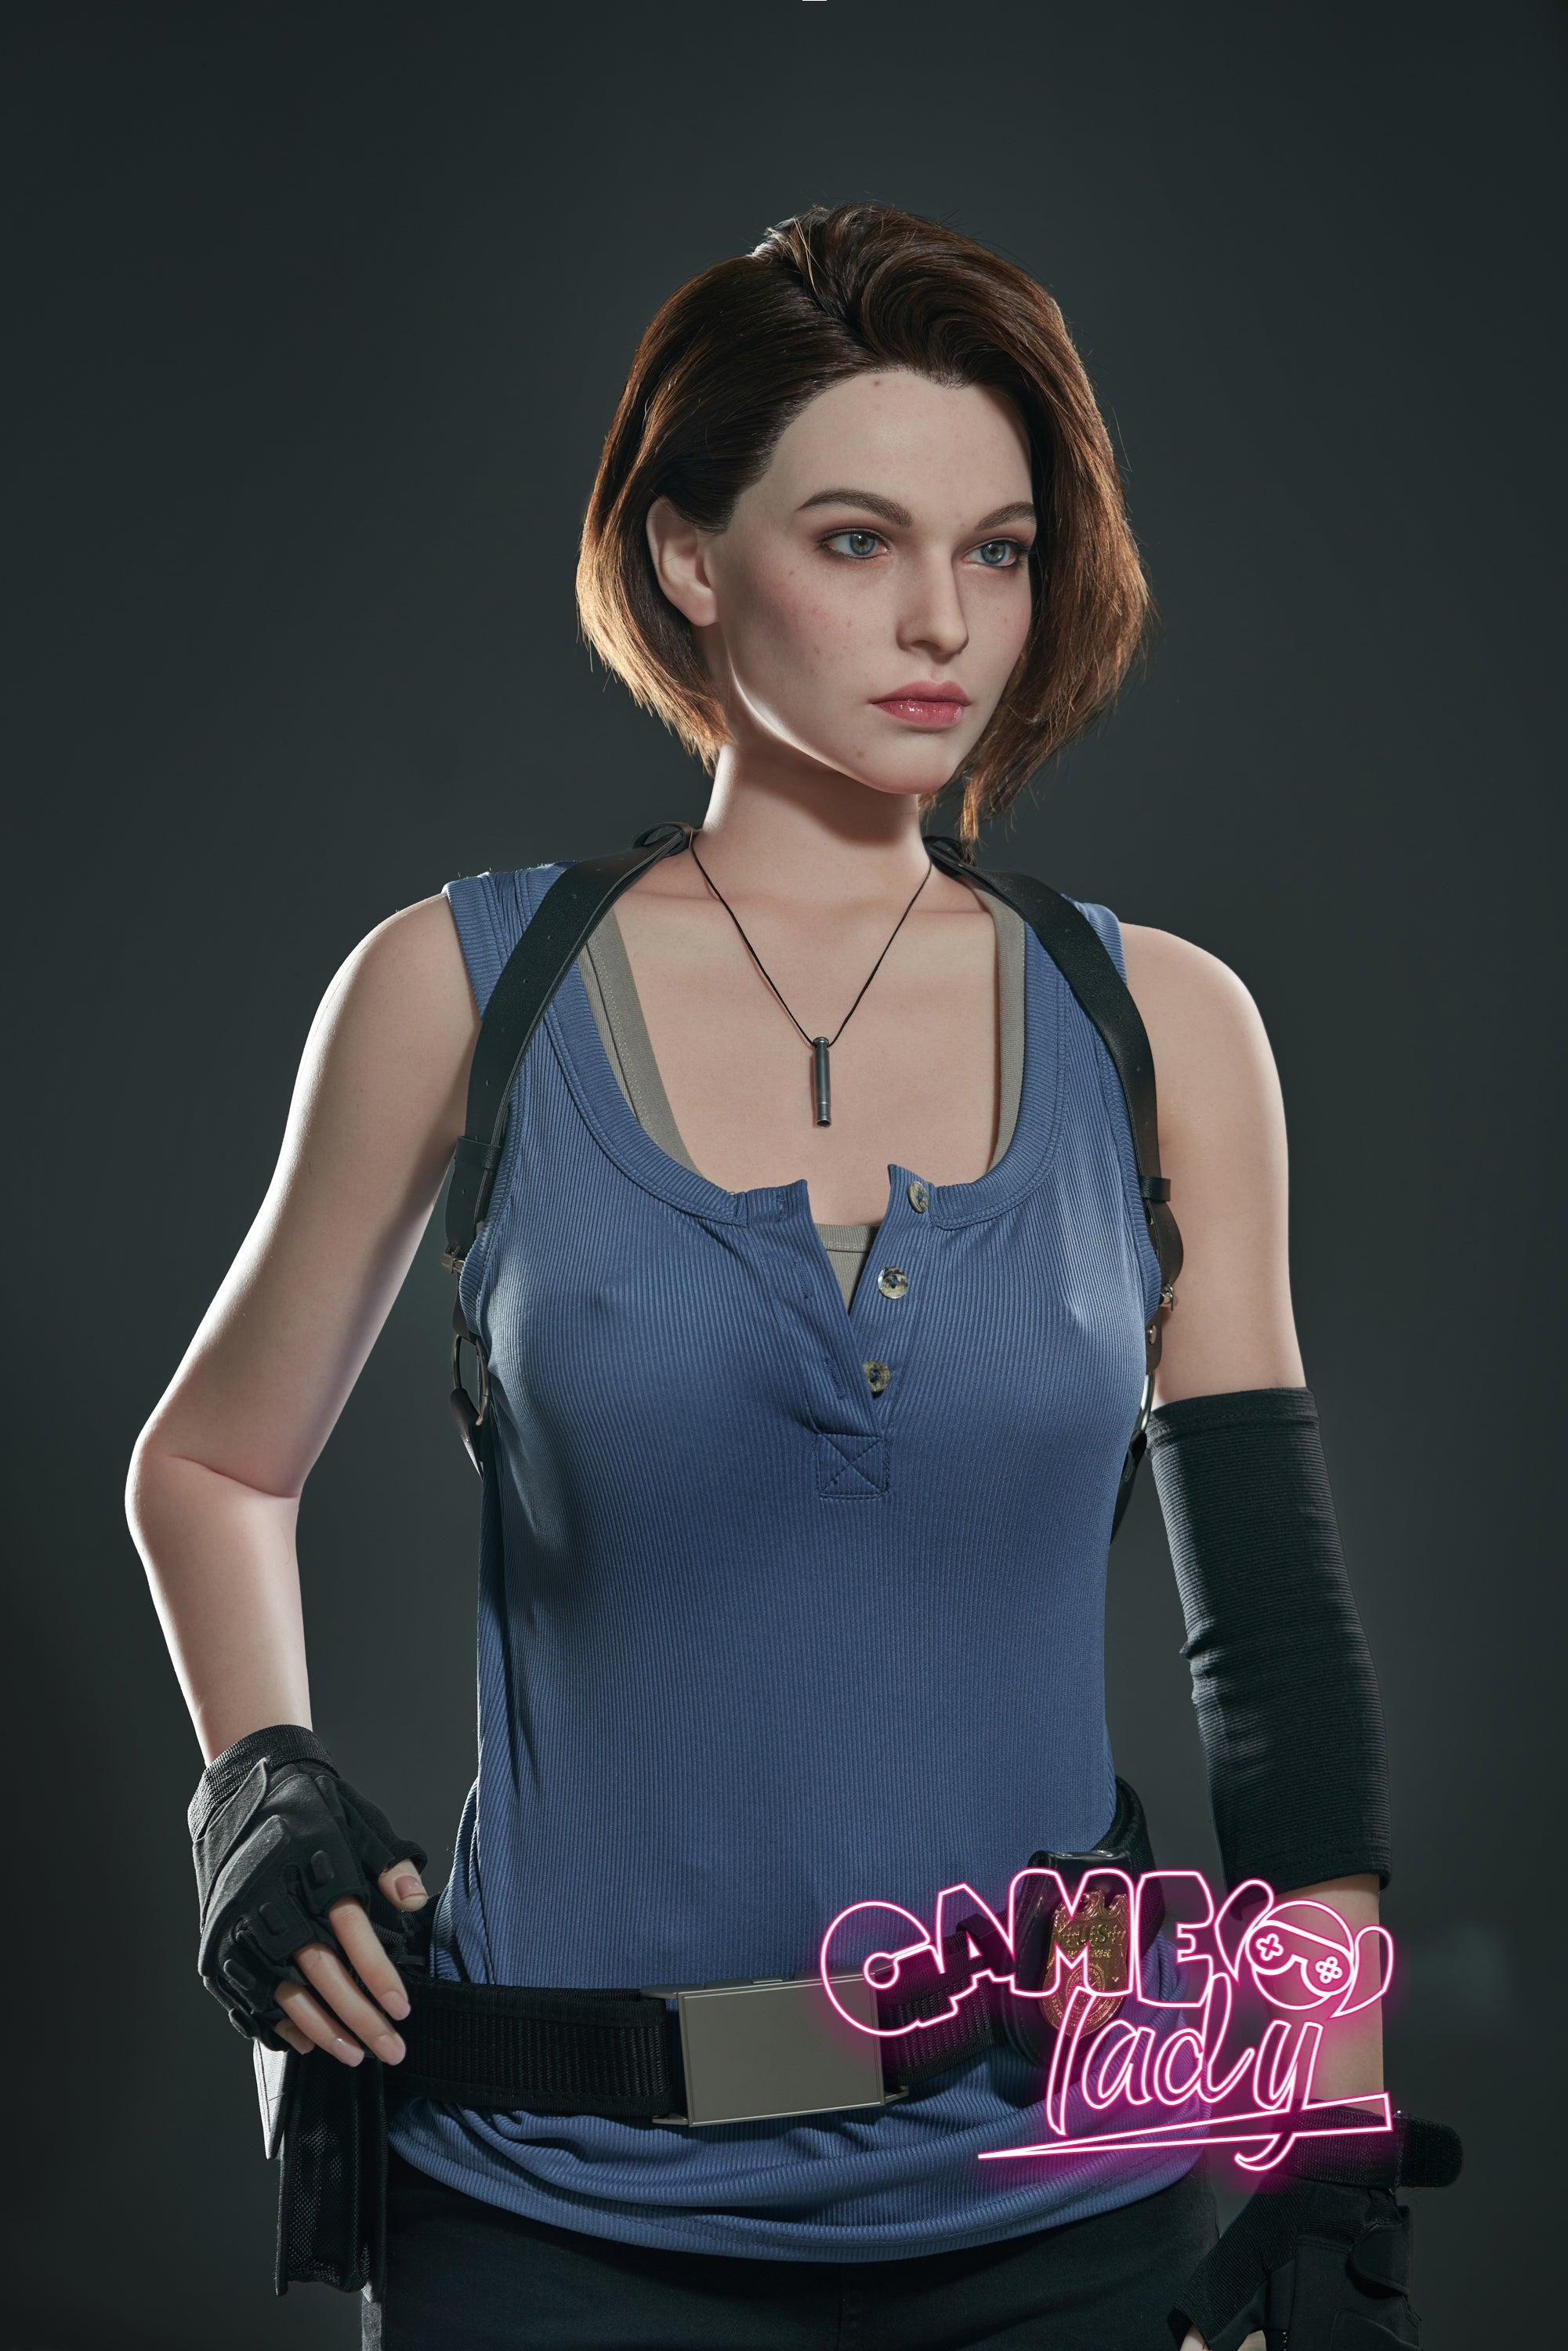 Game Lady 168 cm Silicone - Jill Valentine | Buy Sex Dolls at DOLLS ACTUALLY